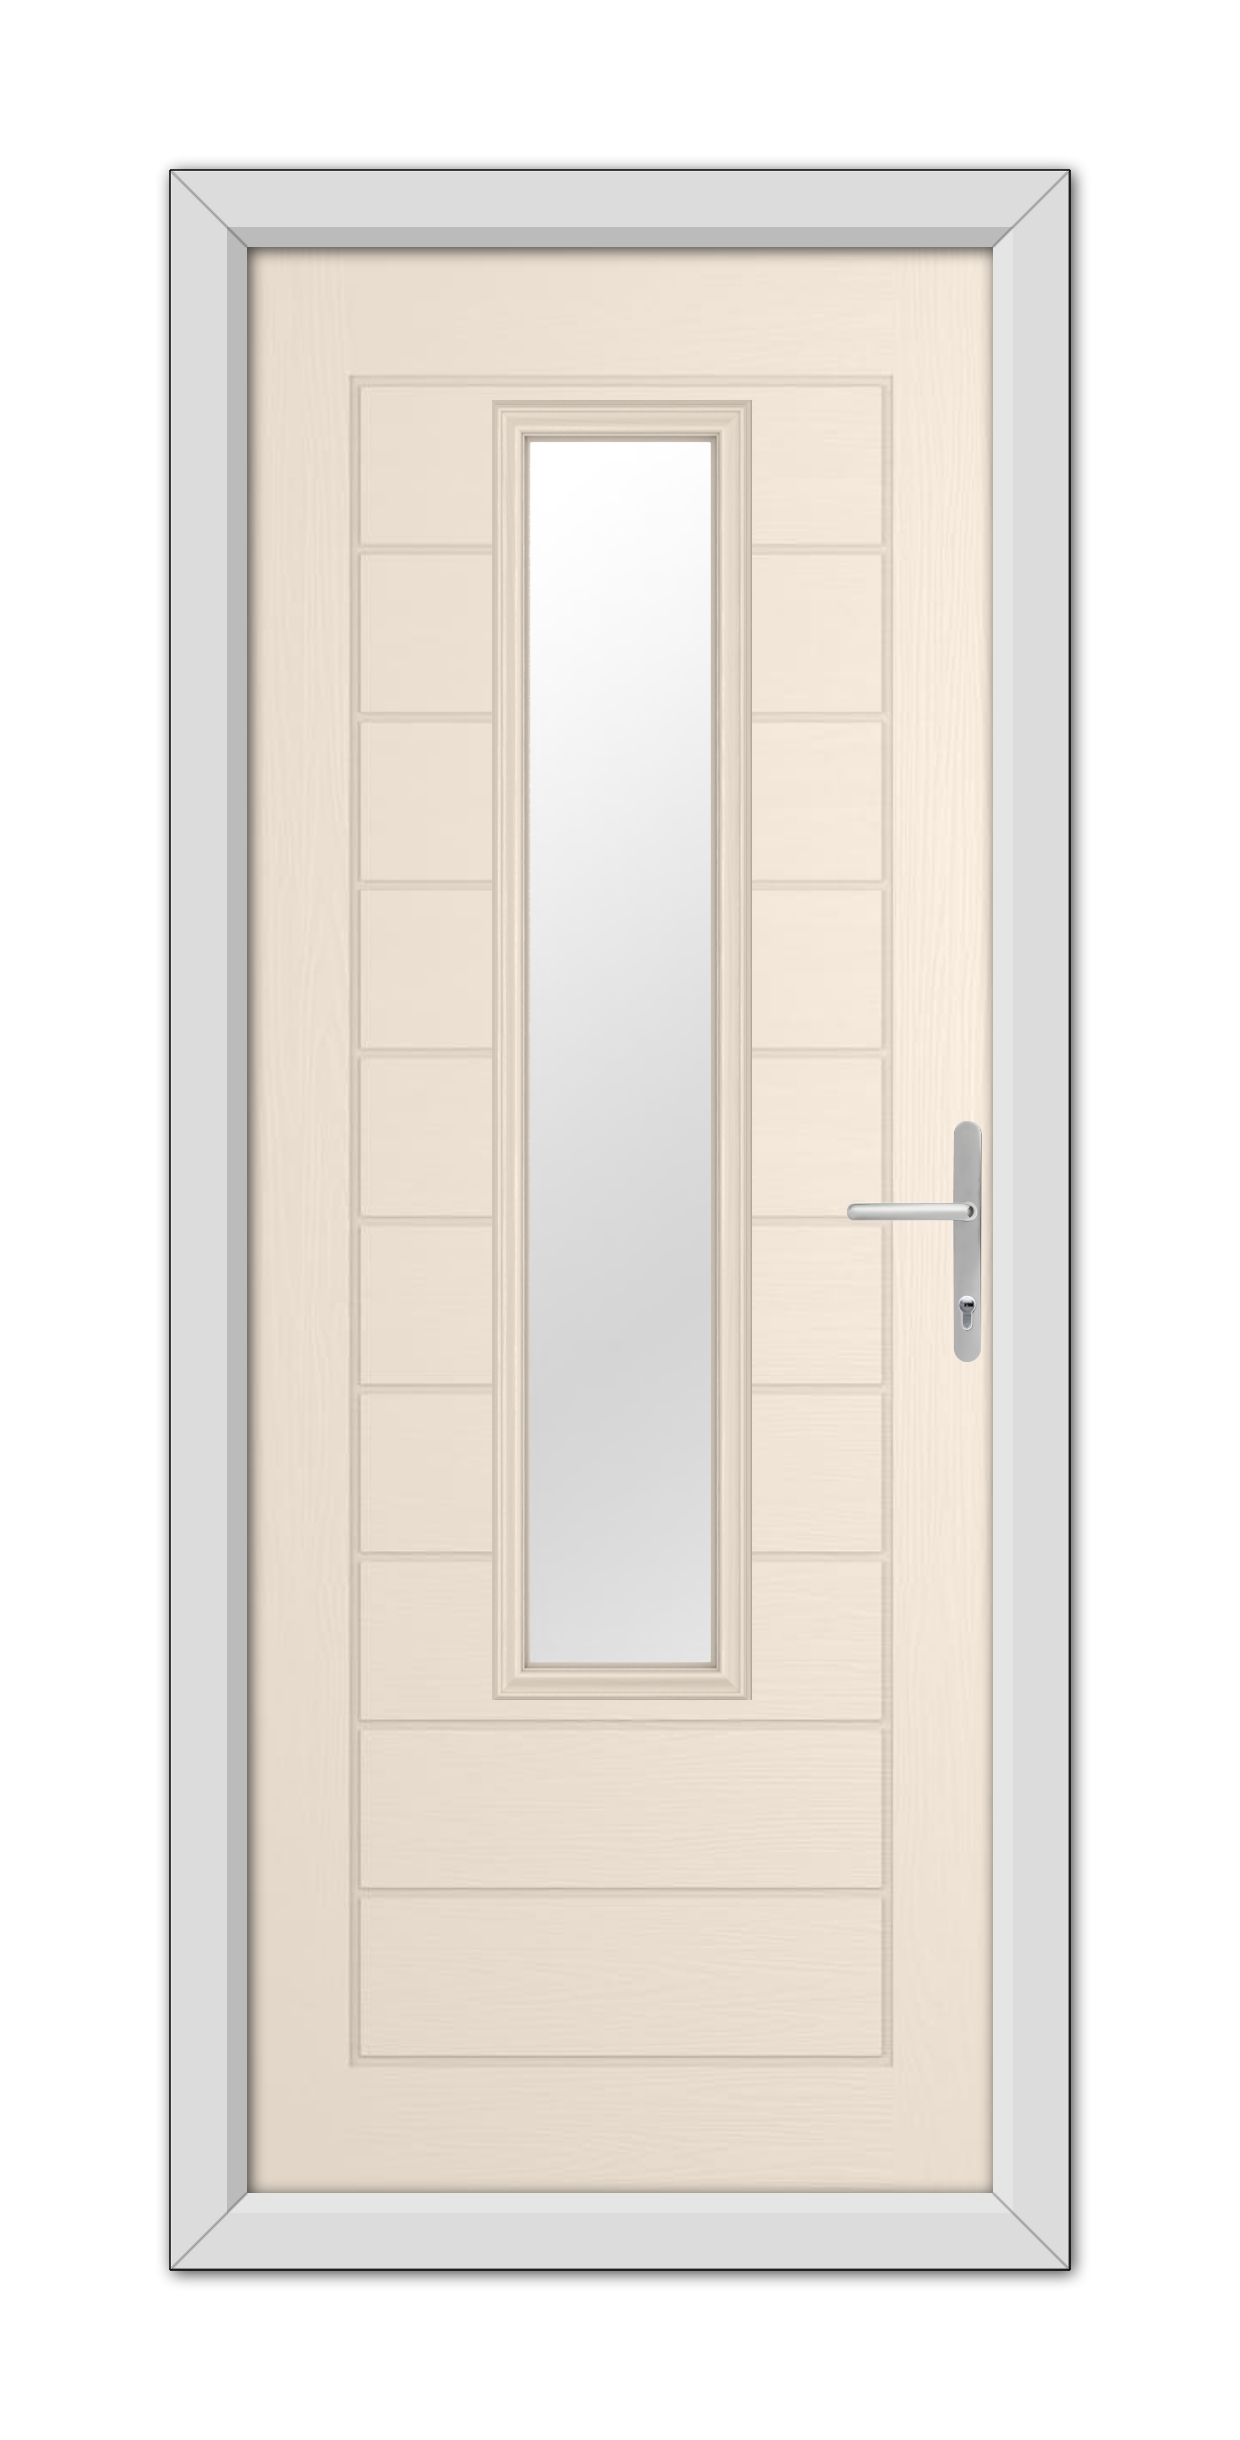 A Cream Bedford Composite Door 48mm Timber Core with a vertical window and stainless steel handle, framed within a gray door frame.